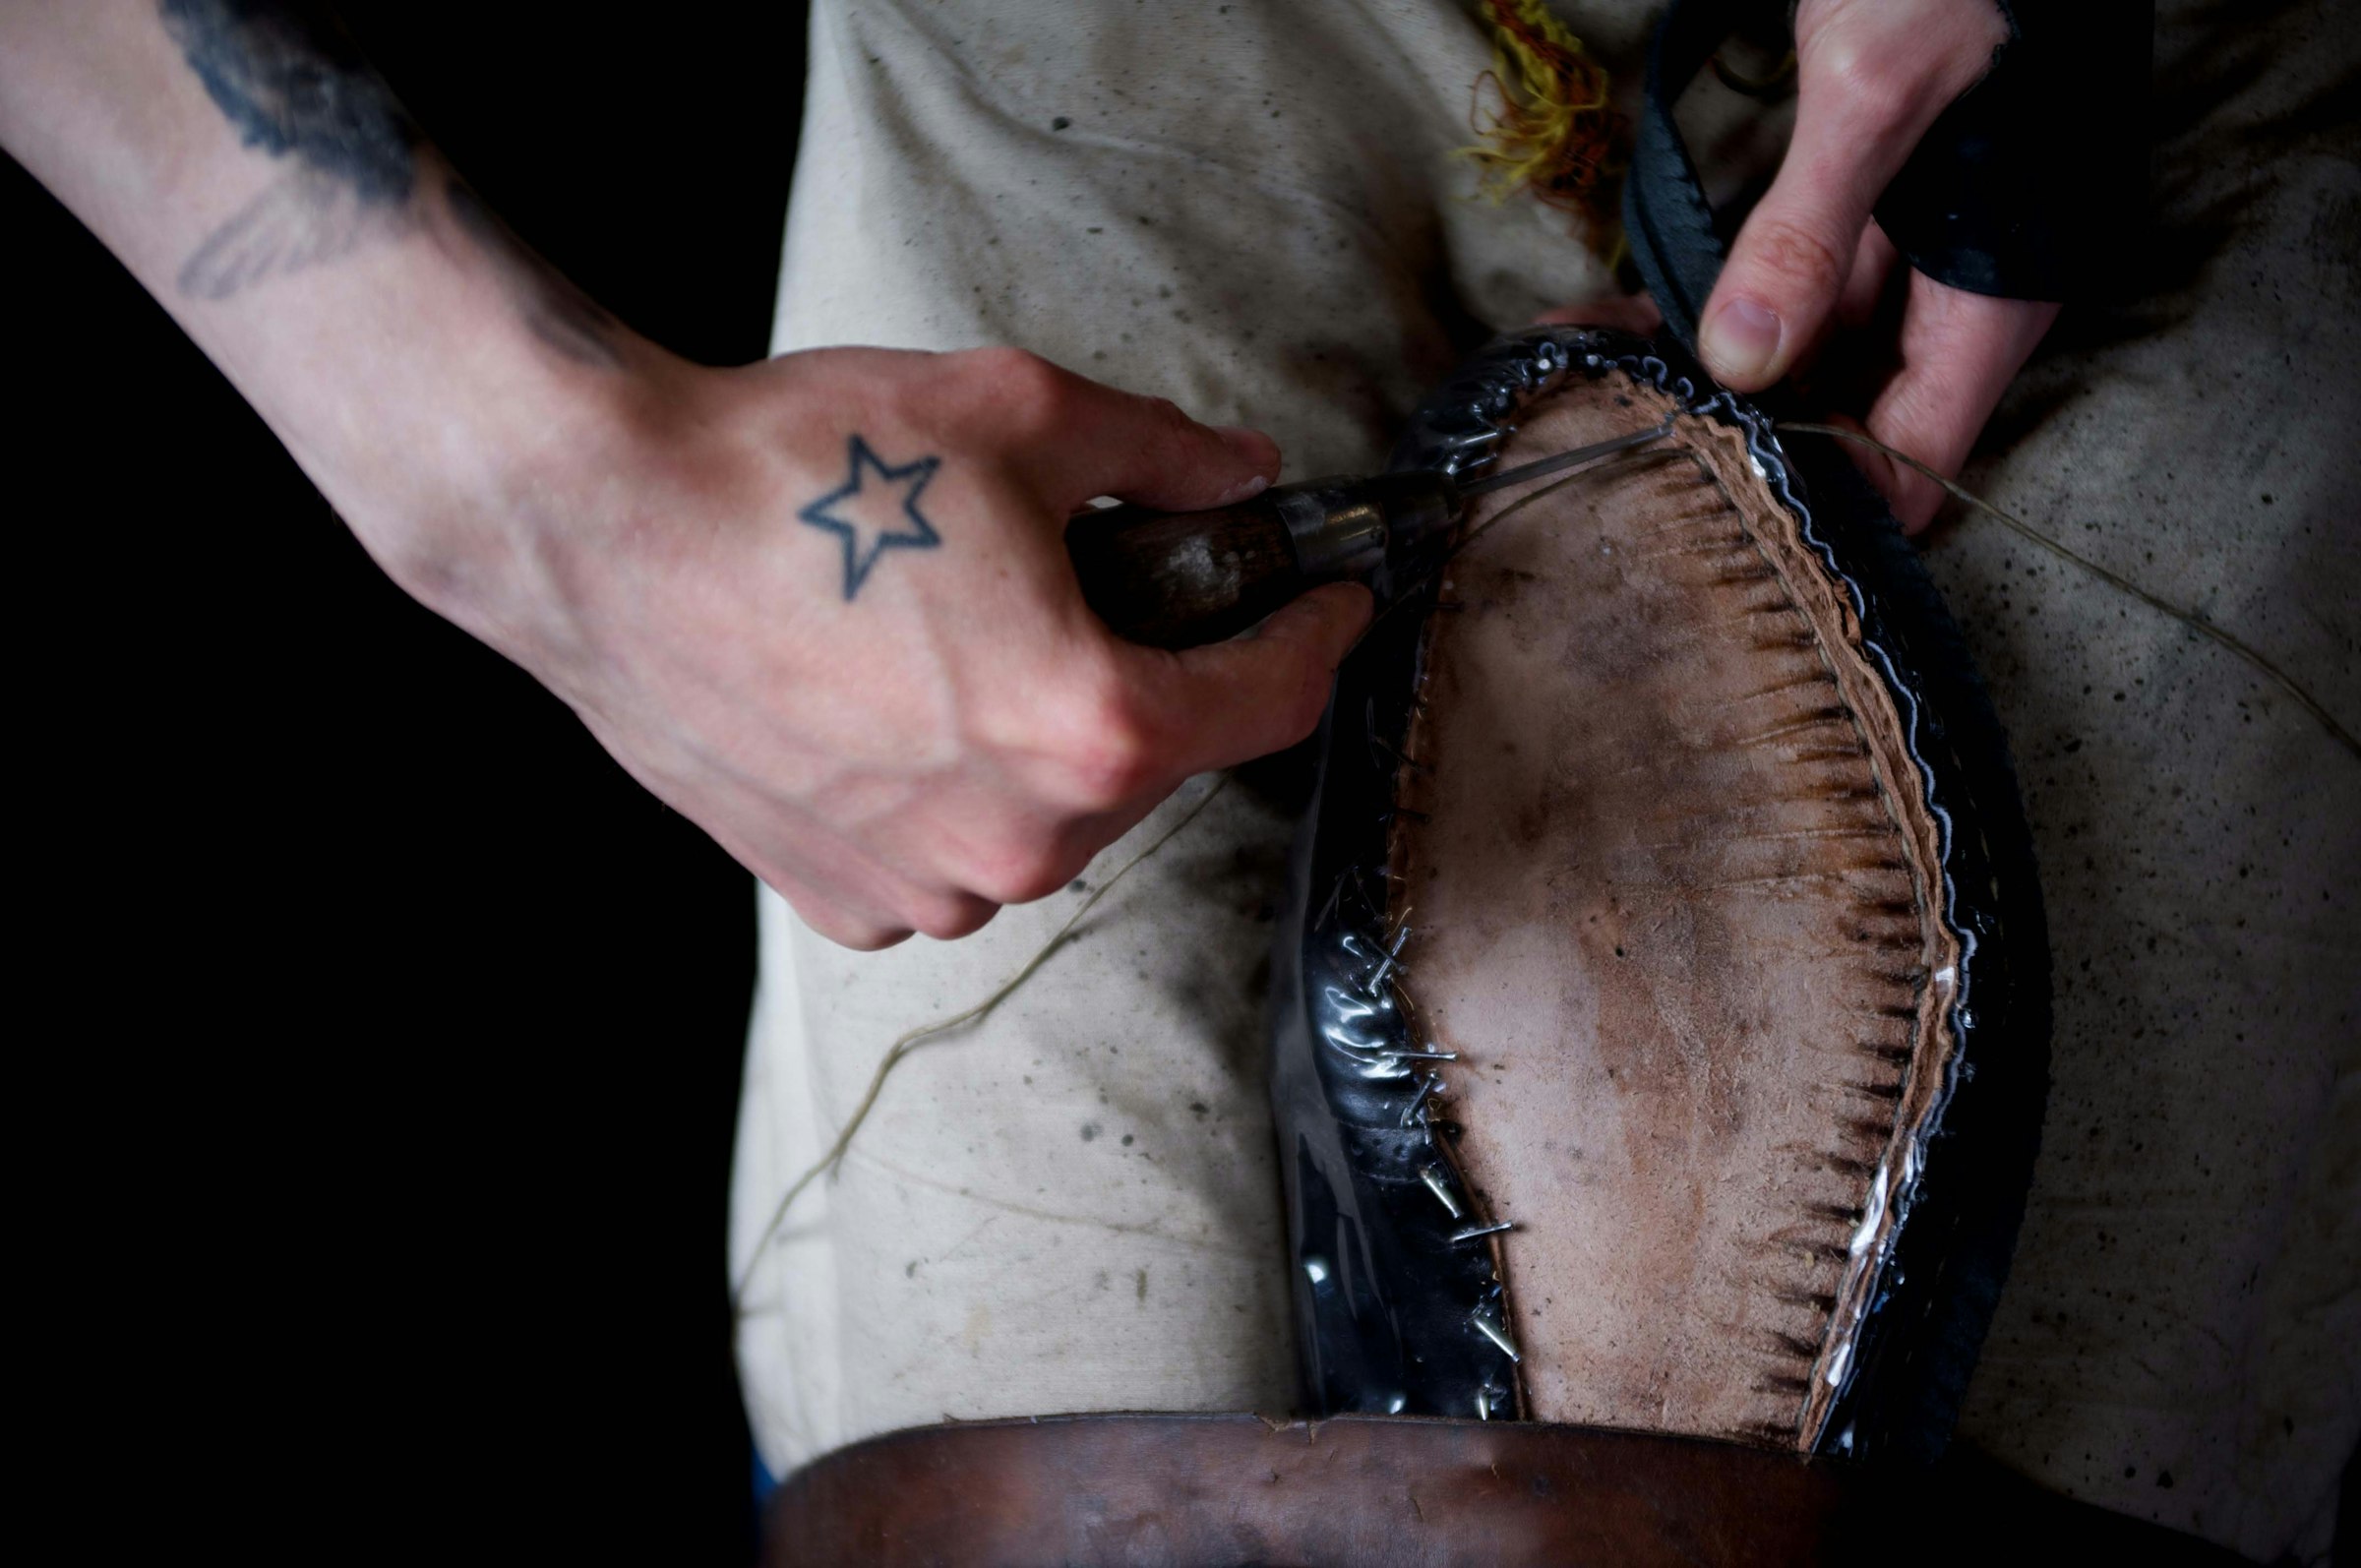 A glance at the Goodyear Welt shoe manufacturing process